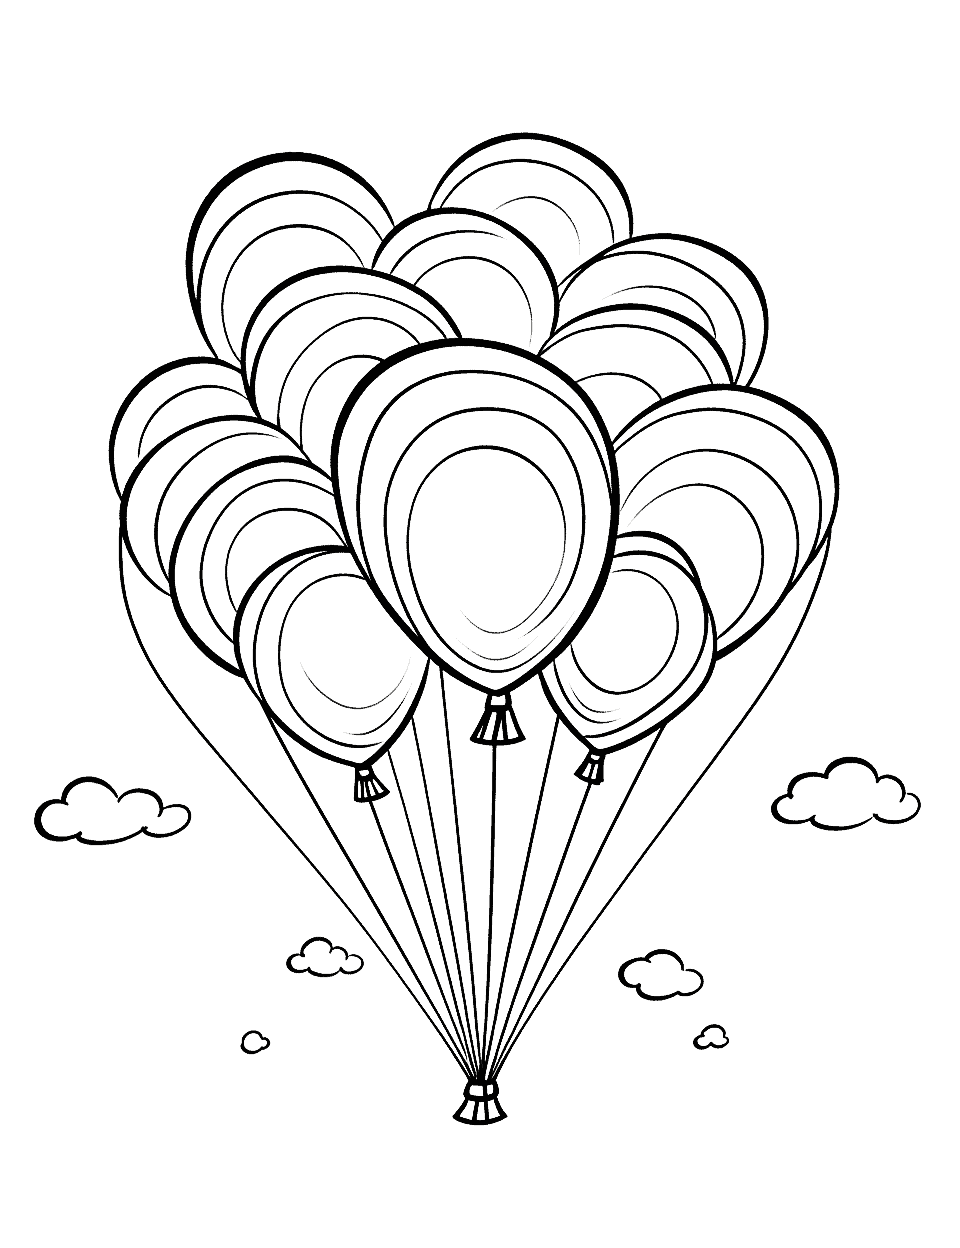 Rainbow Balloons Coloring Page - A bunch of floating balloons in the shape and colors of a rainbow.